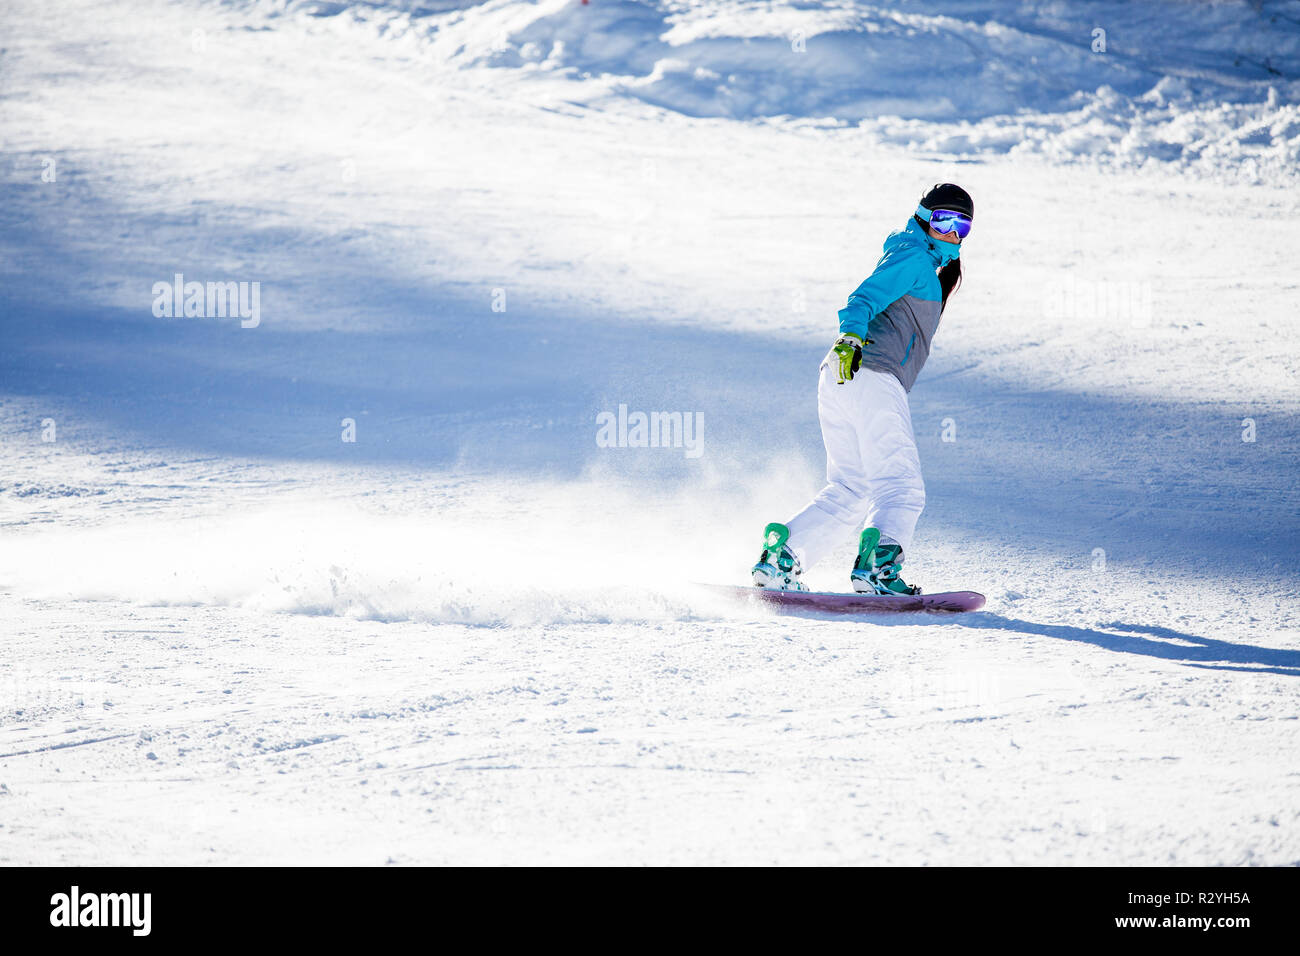 Photo of sports woman wearing helmet and mask snowboarding on snowy slope Stock Photo